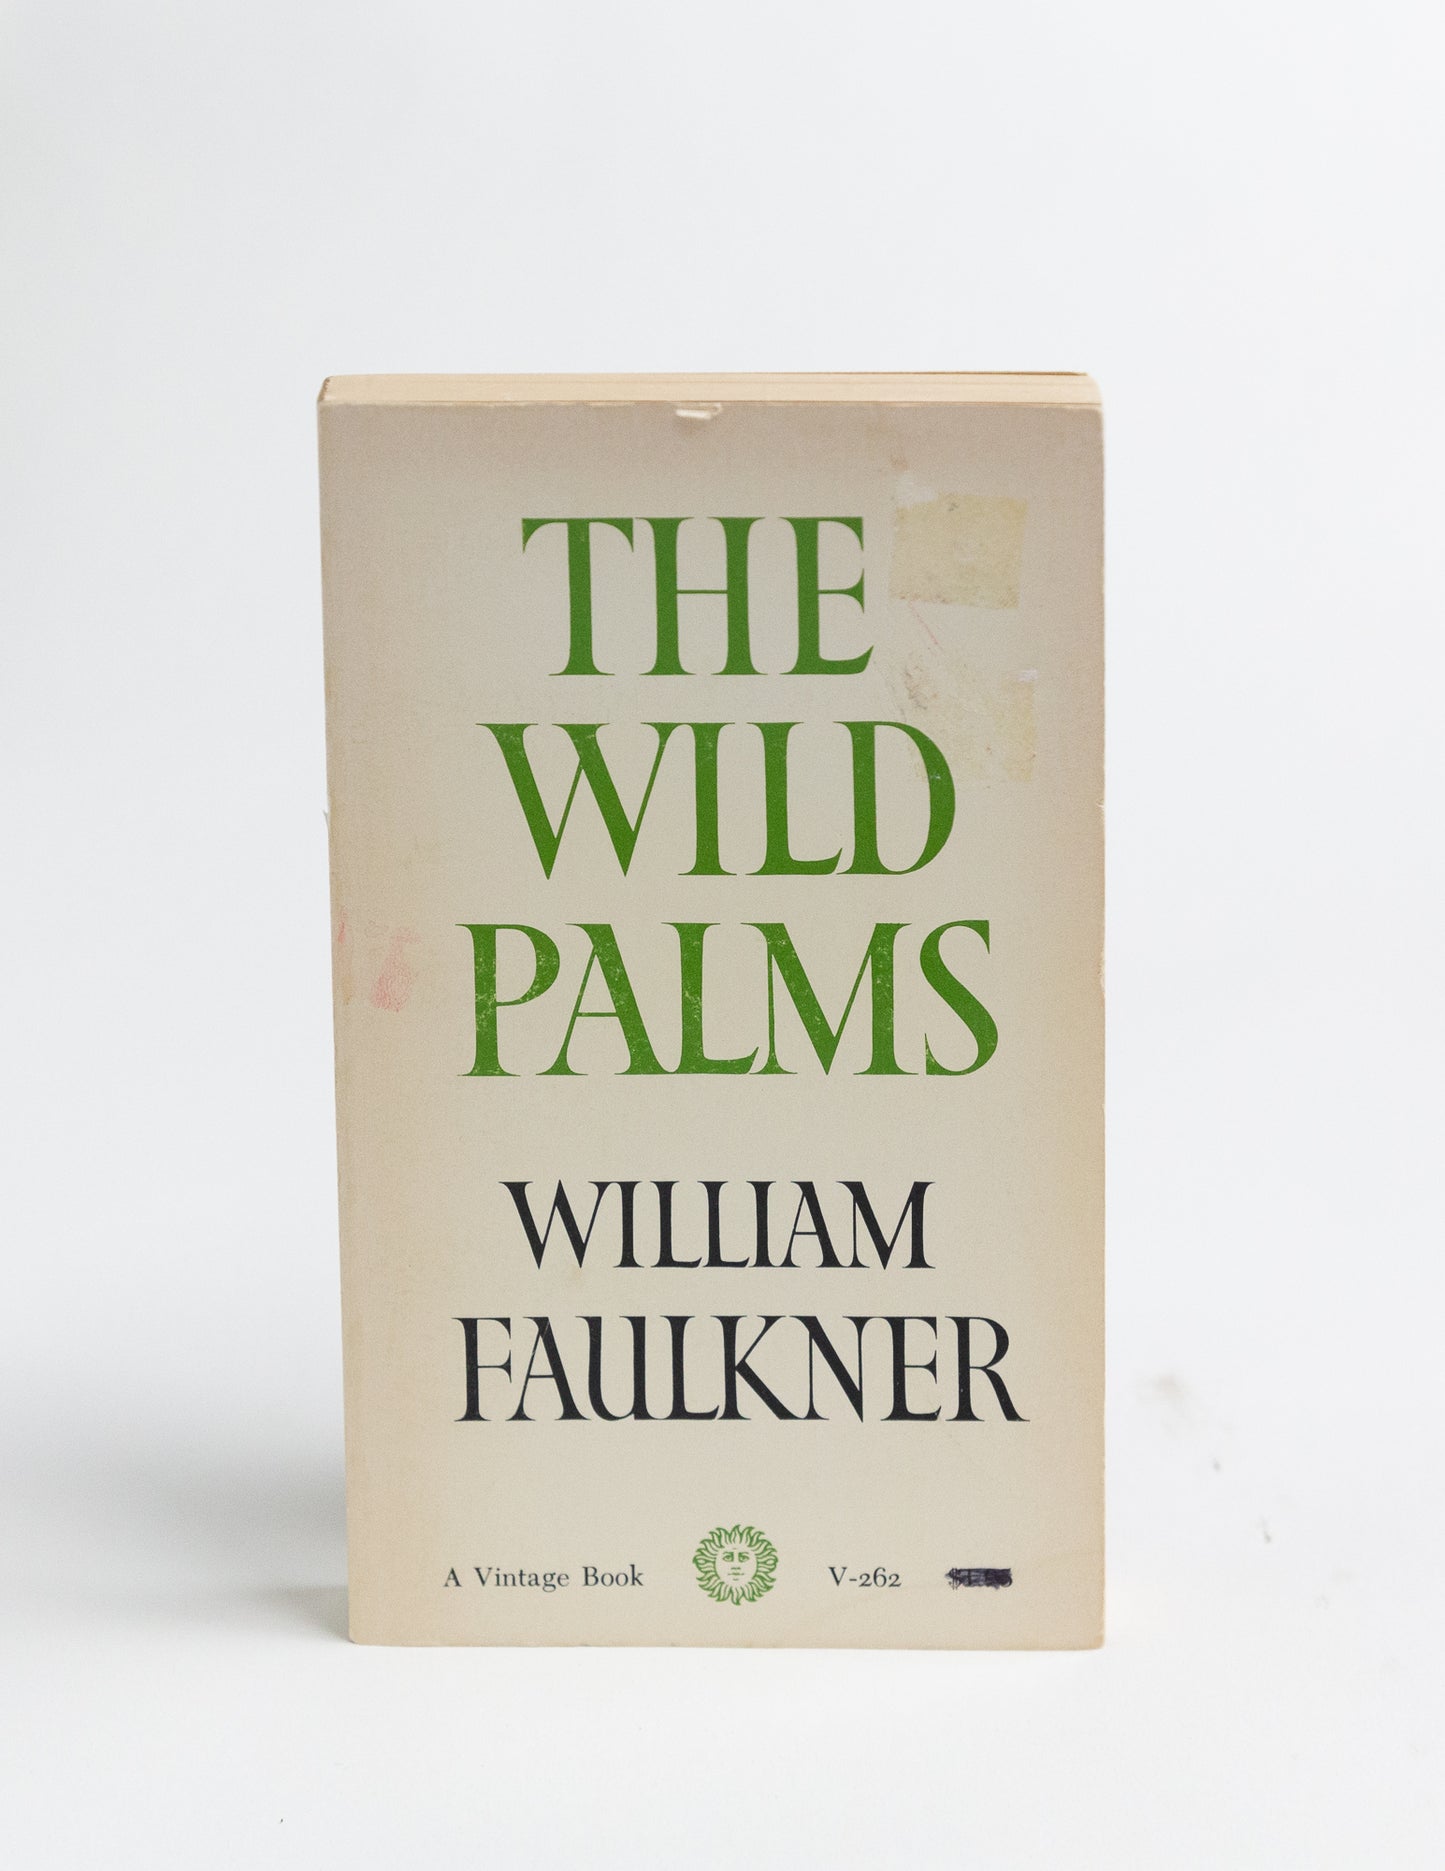 'The Wild Palms' by William Faulkner